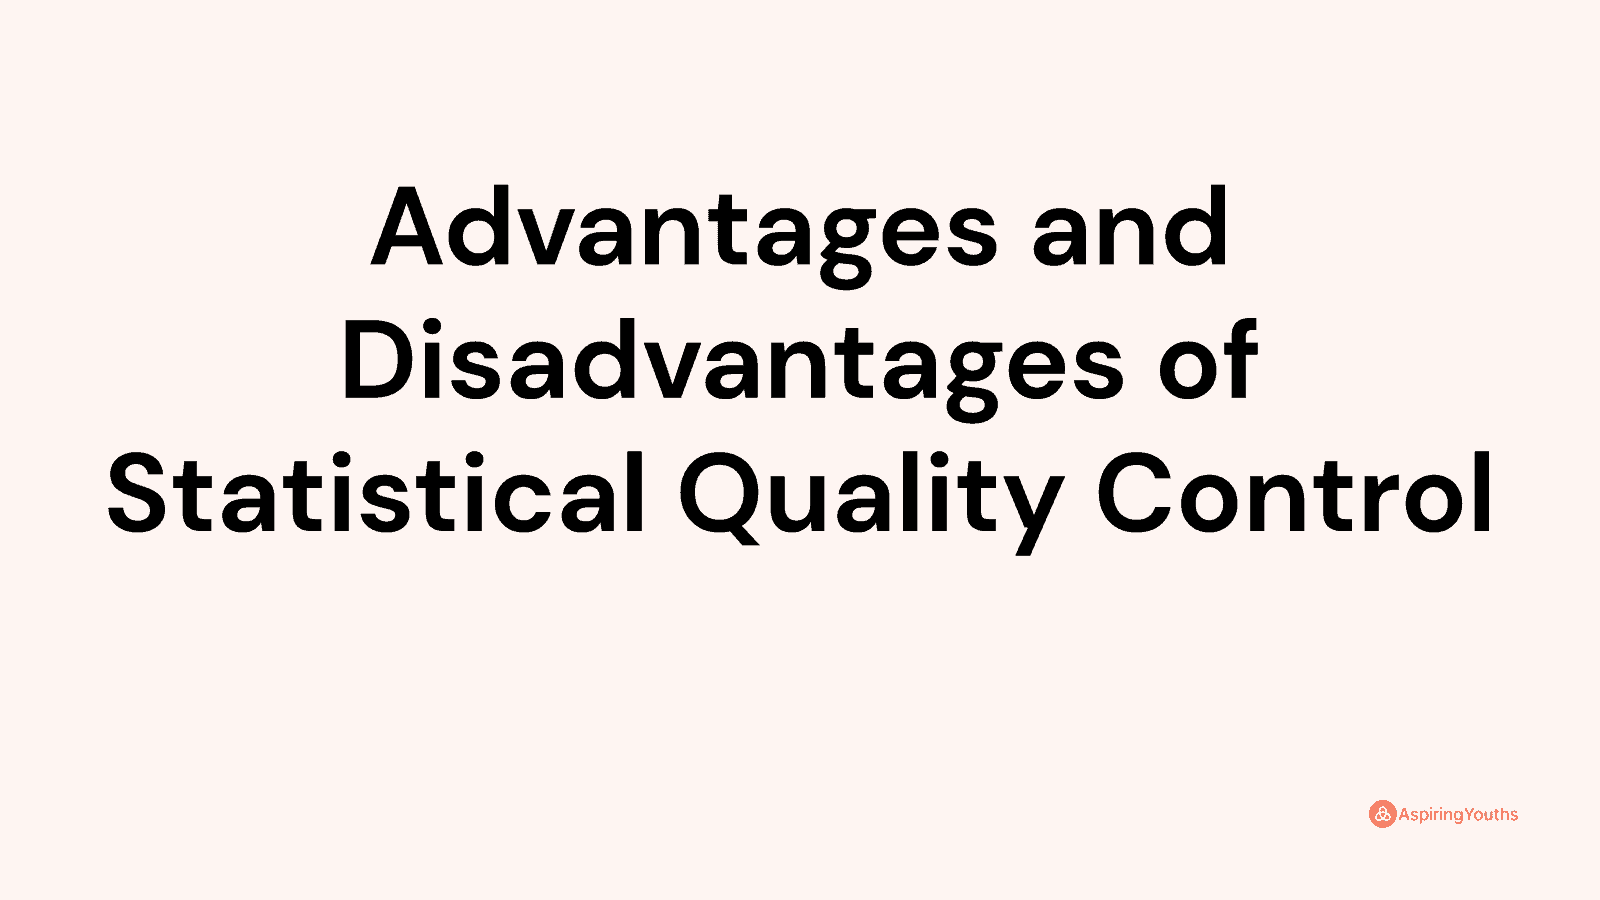 Advantages and disadvantages of Statistical Quality Control